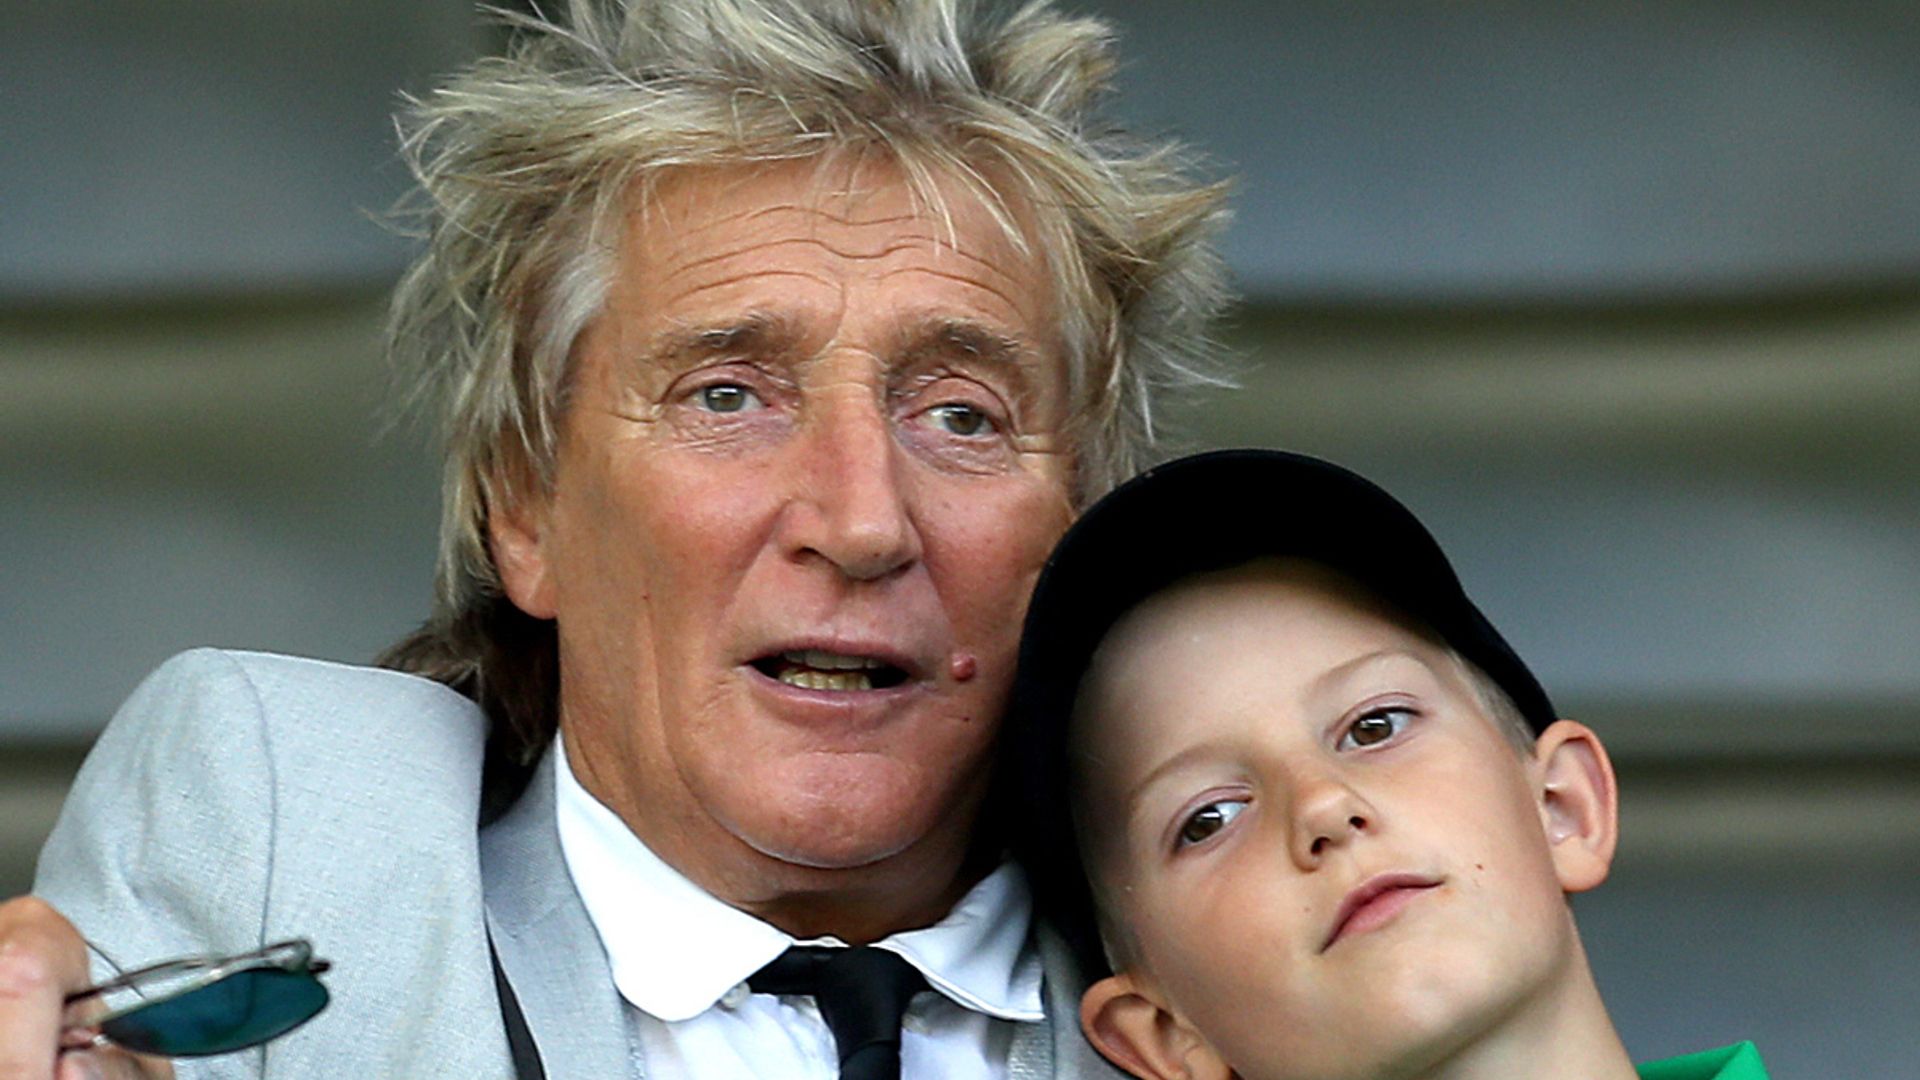 Rod Stewart refuses to retire after kids begged him to focus on being  family man: 'I love what I do